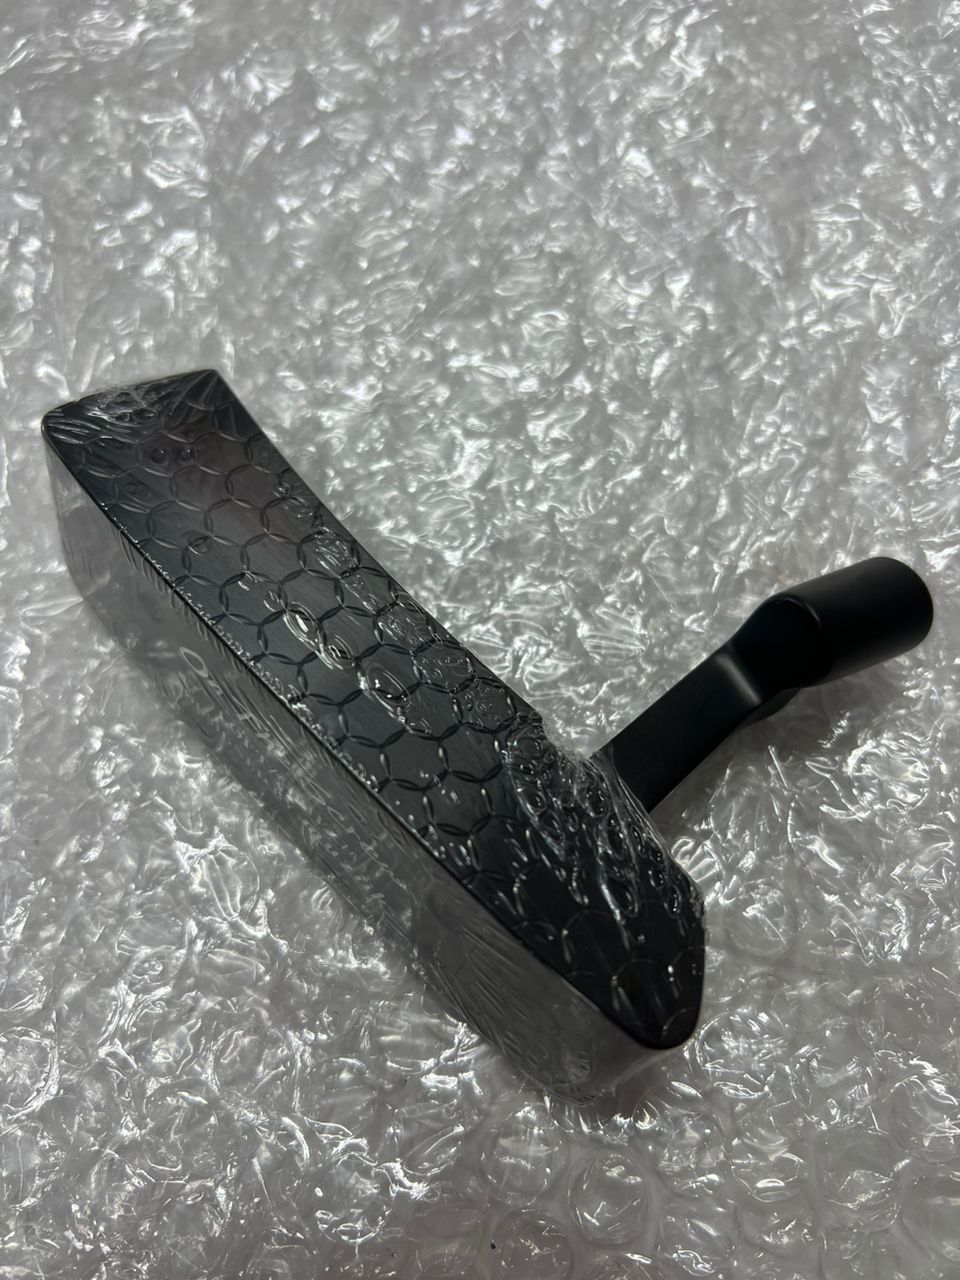 MUZIIK 6121 BLACK PUTTER (HEAD ONLY) - LIMITED EDITION